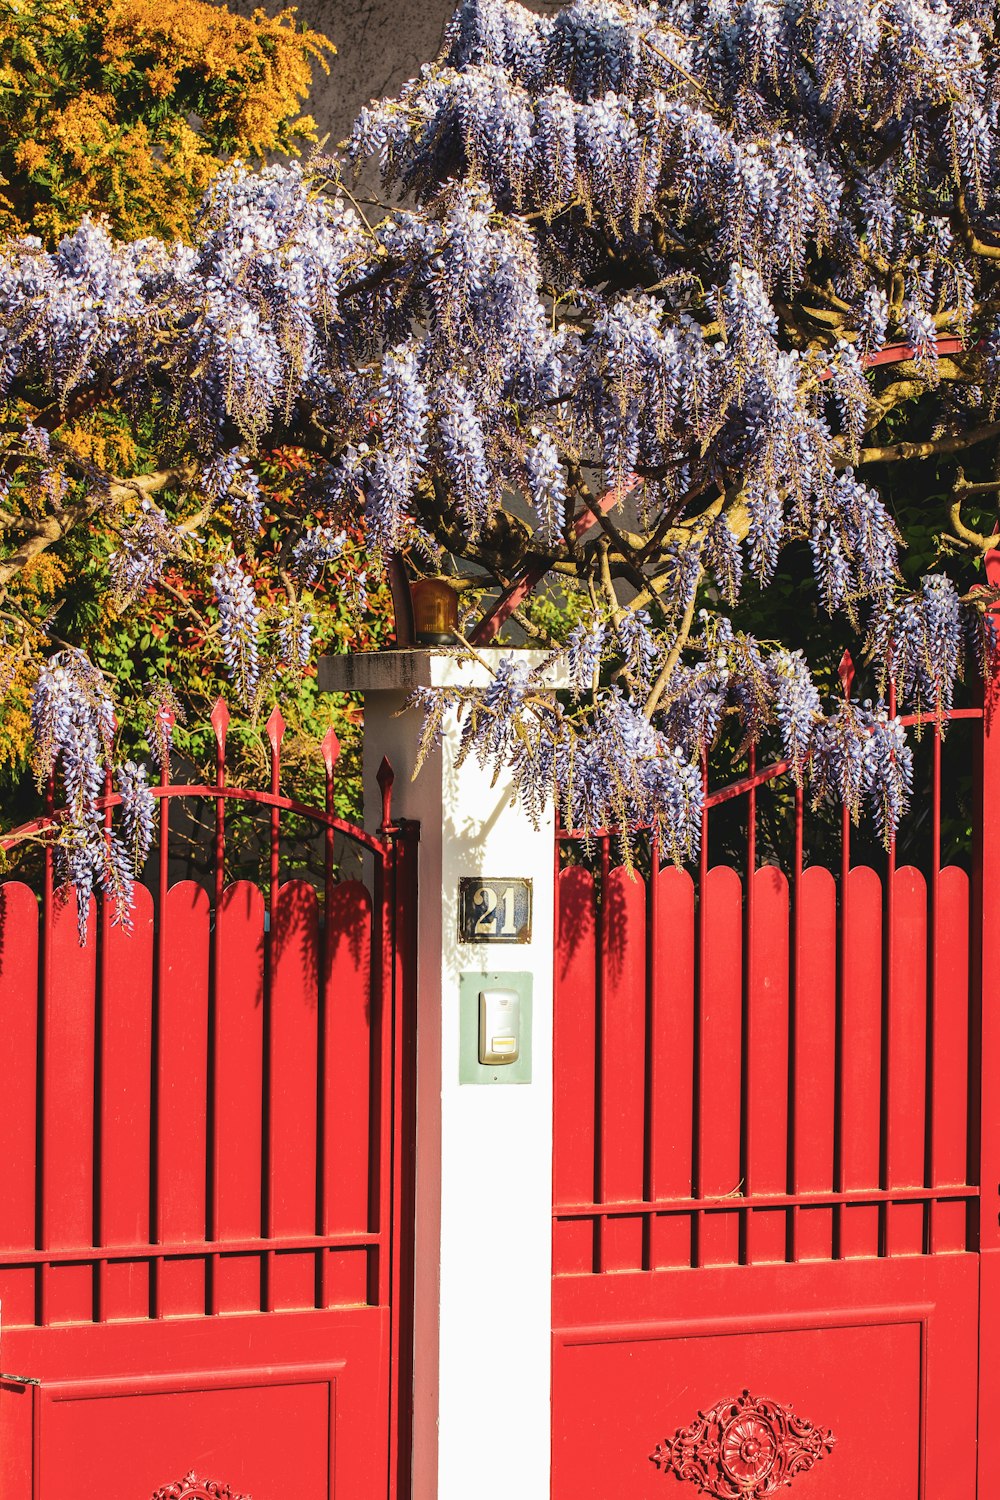 a red fence with purple flowers on it